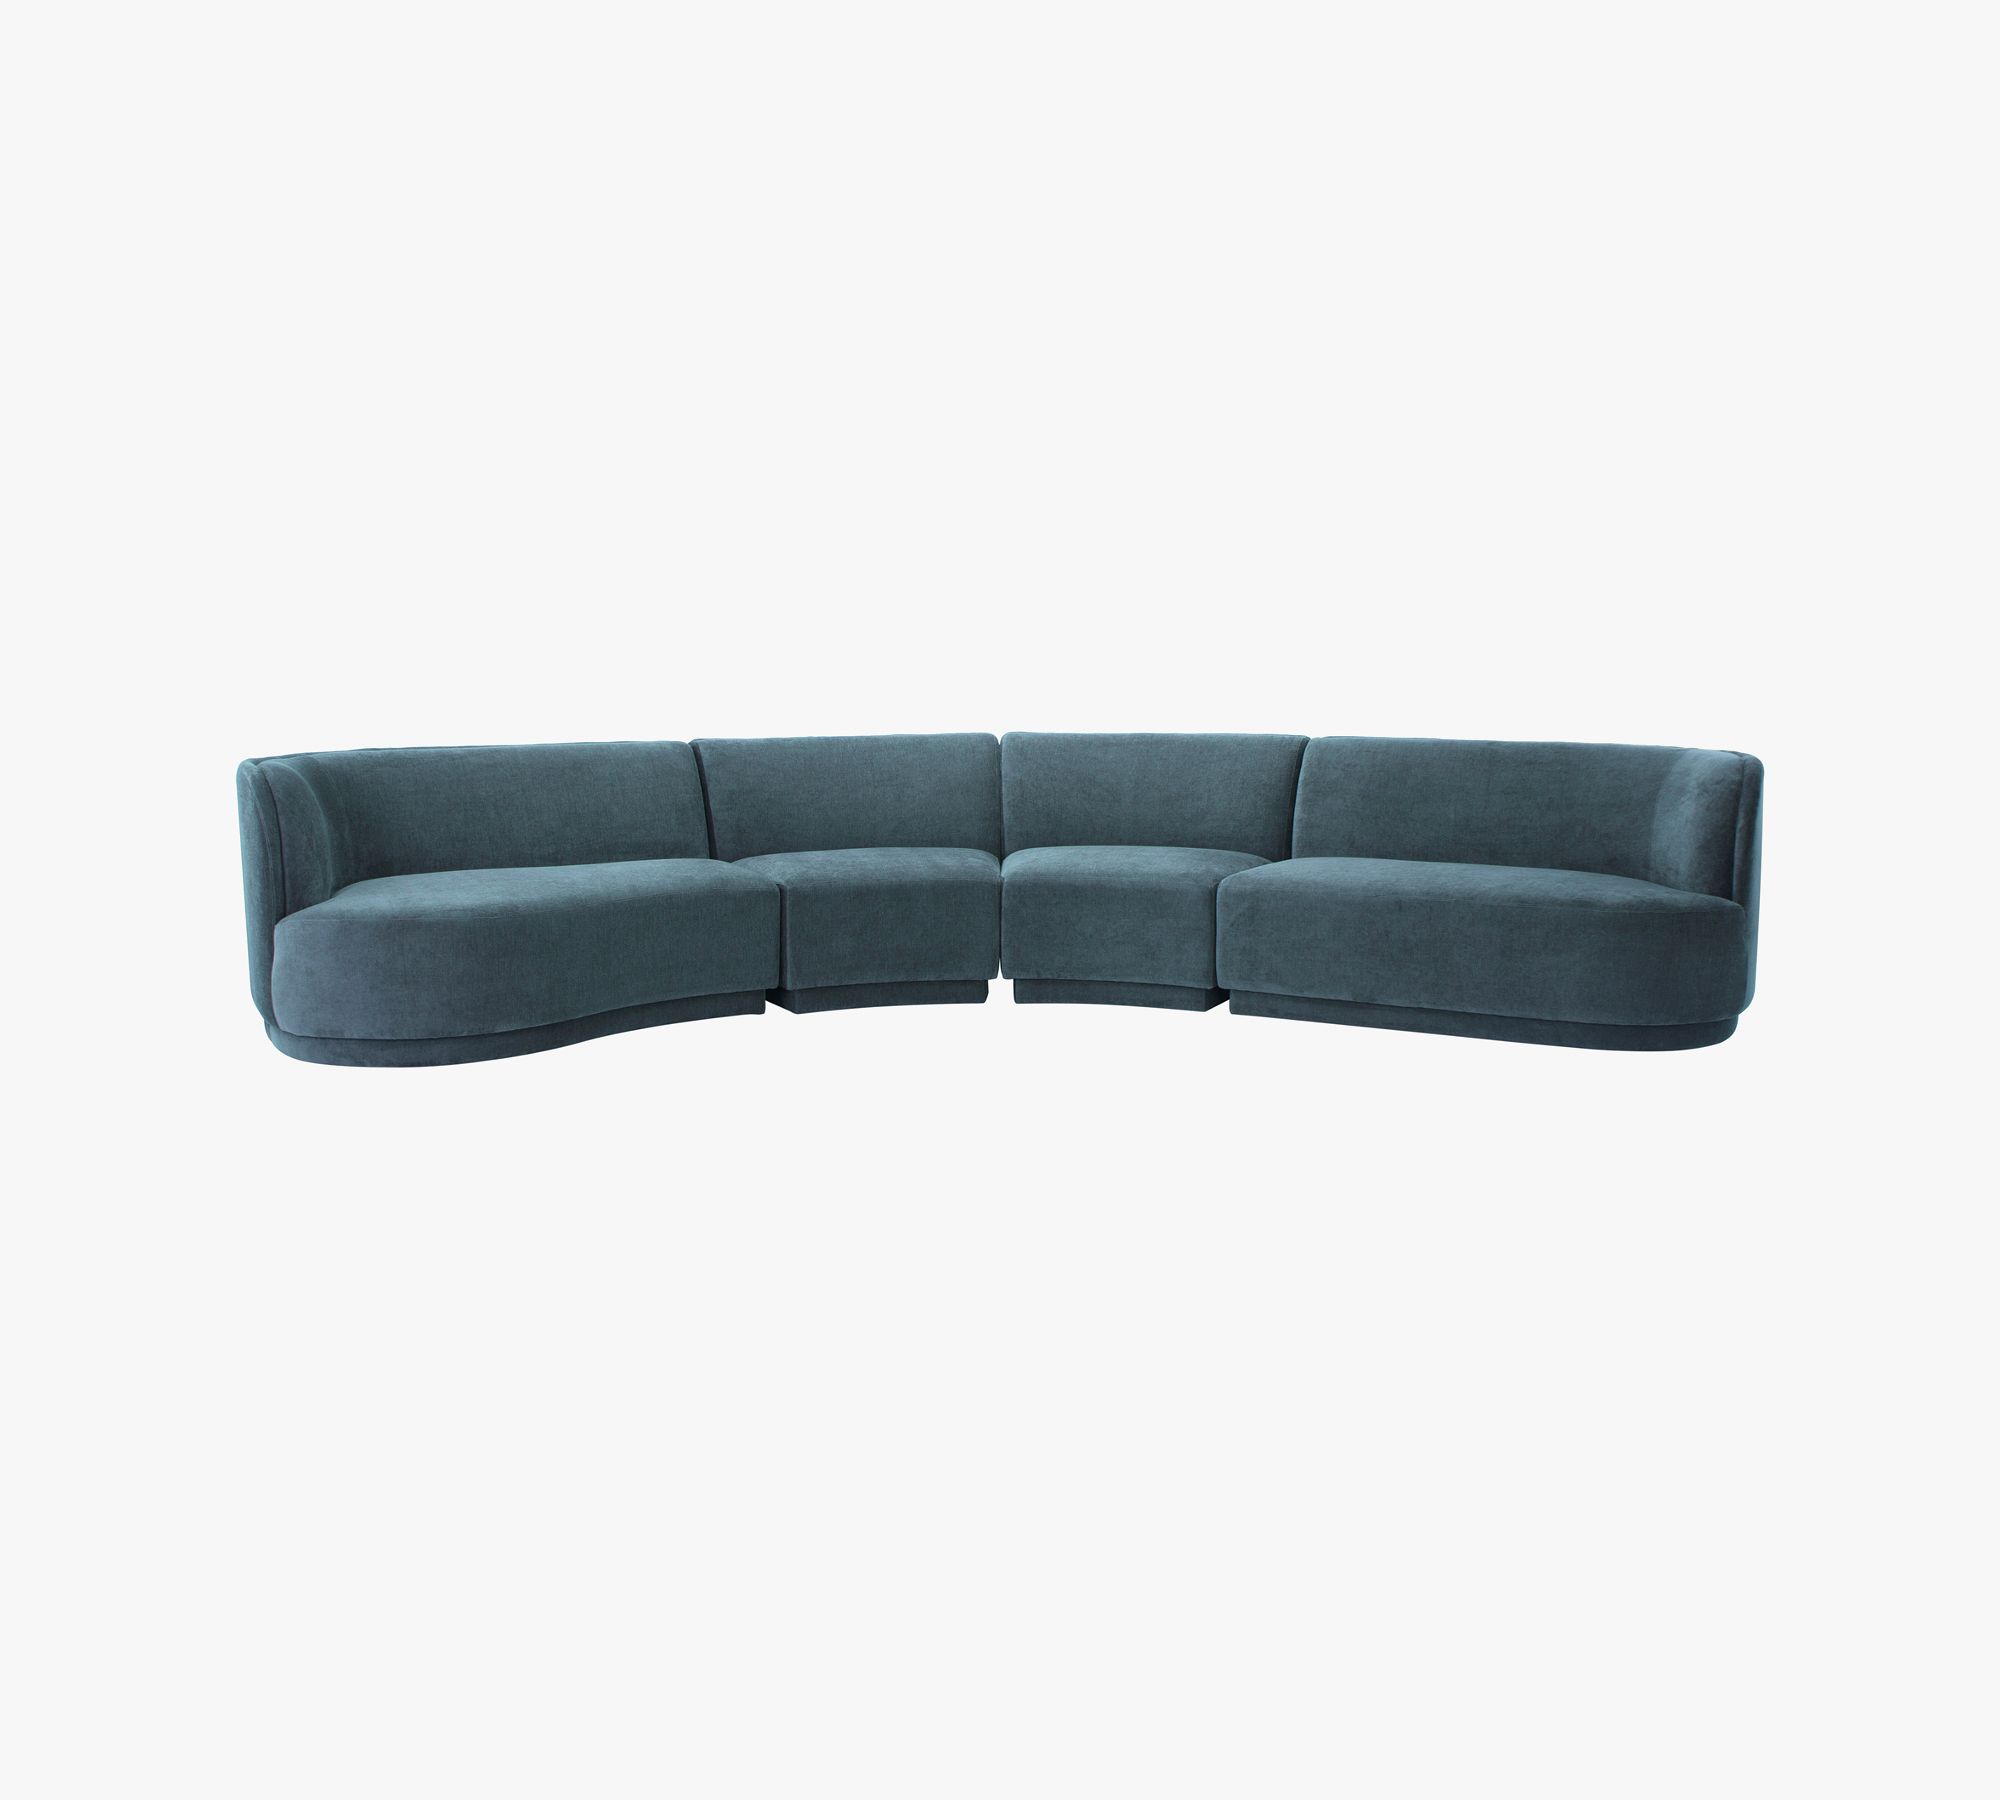 Farrow 4-Piece Curved Chaise Sectional